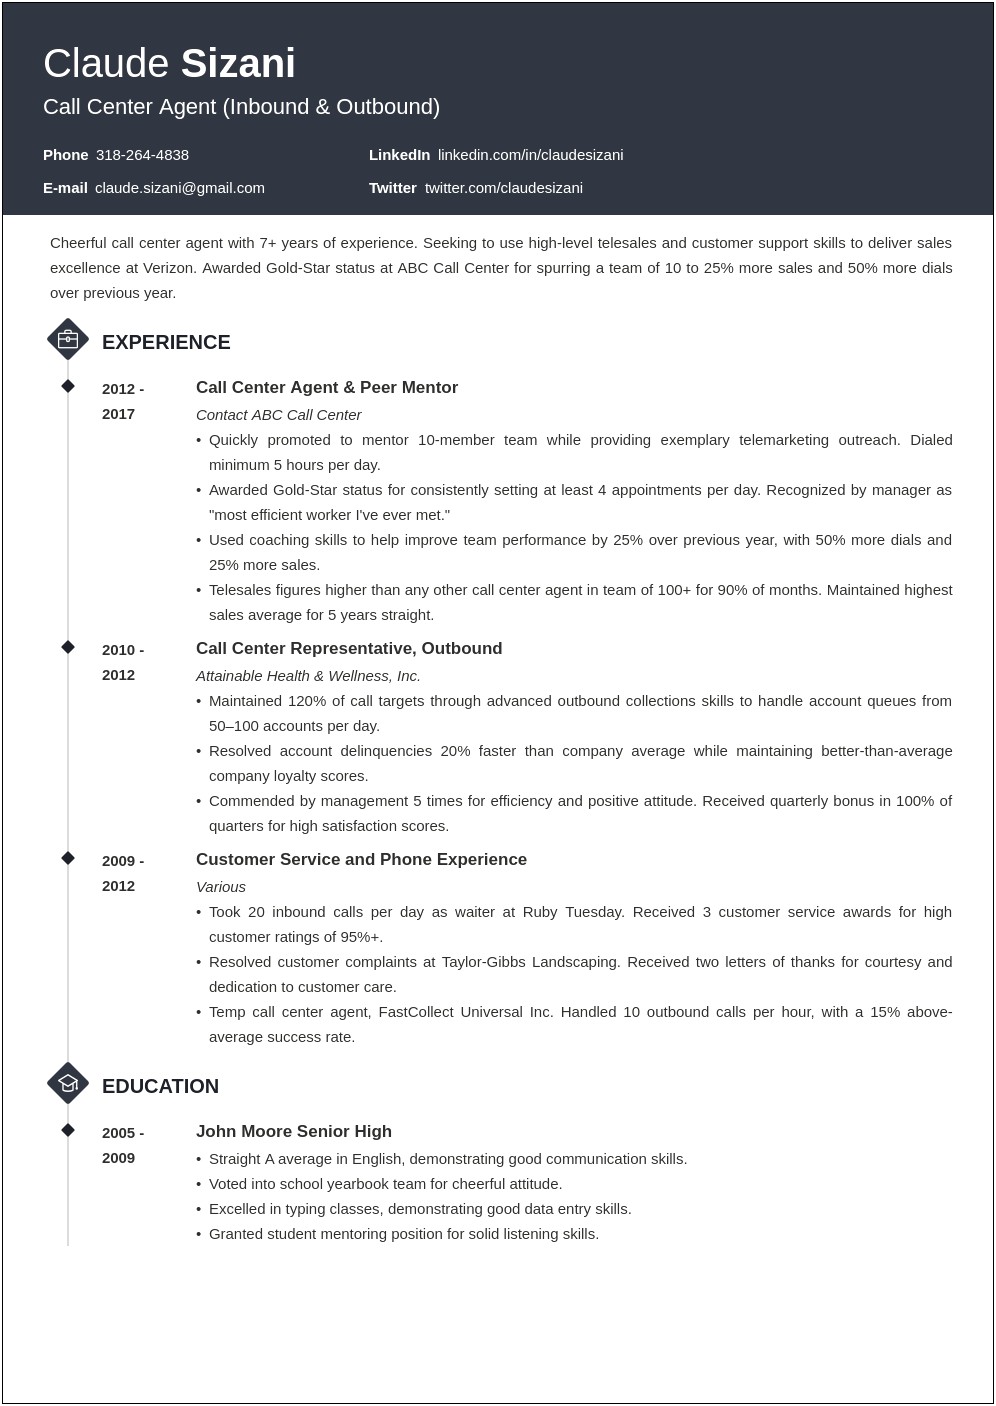 General Resume Objective Examples Call Center